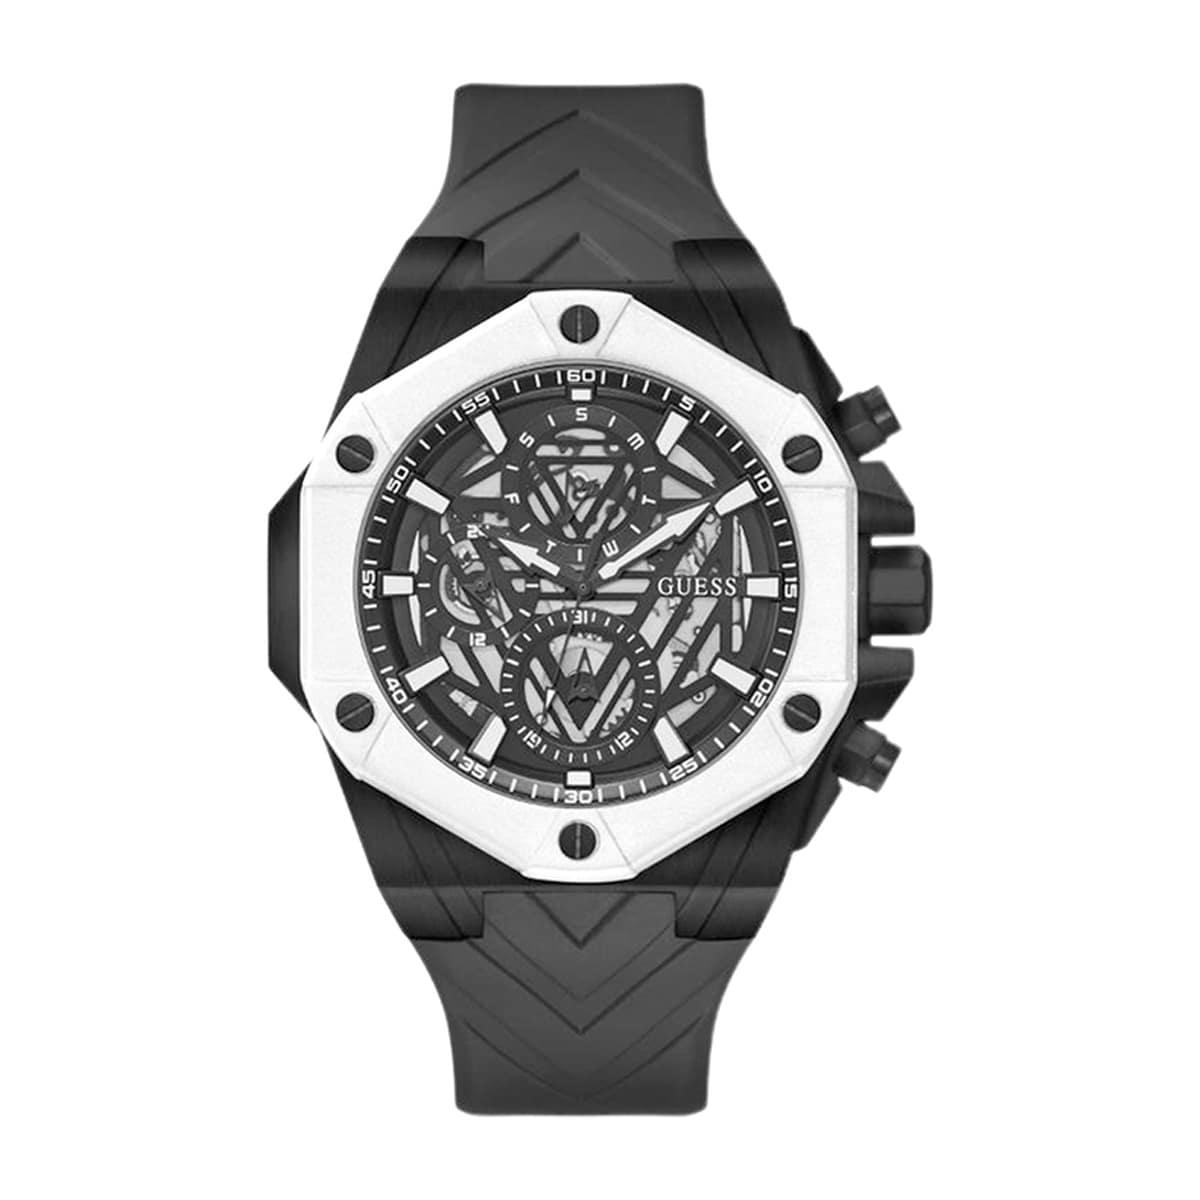 MONTRE GUESS FORMULA HOMME CHRONO SILICONE